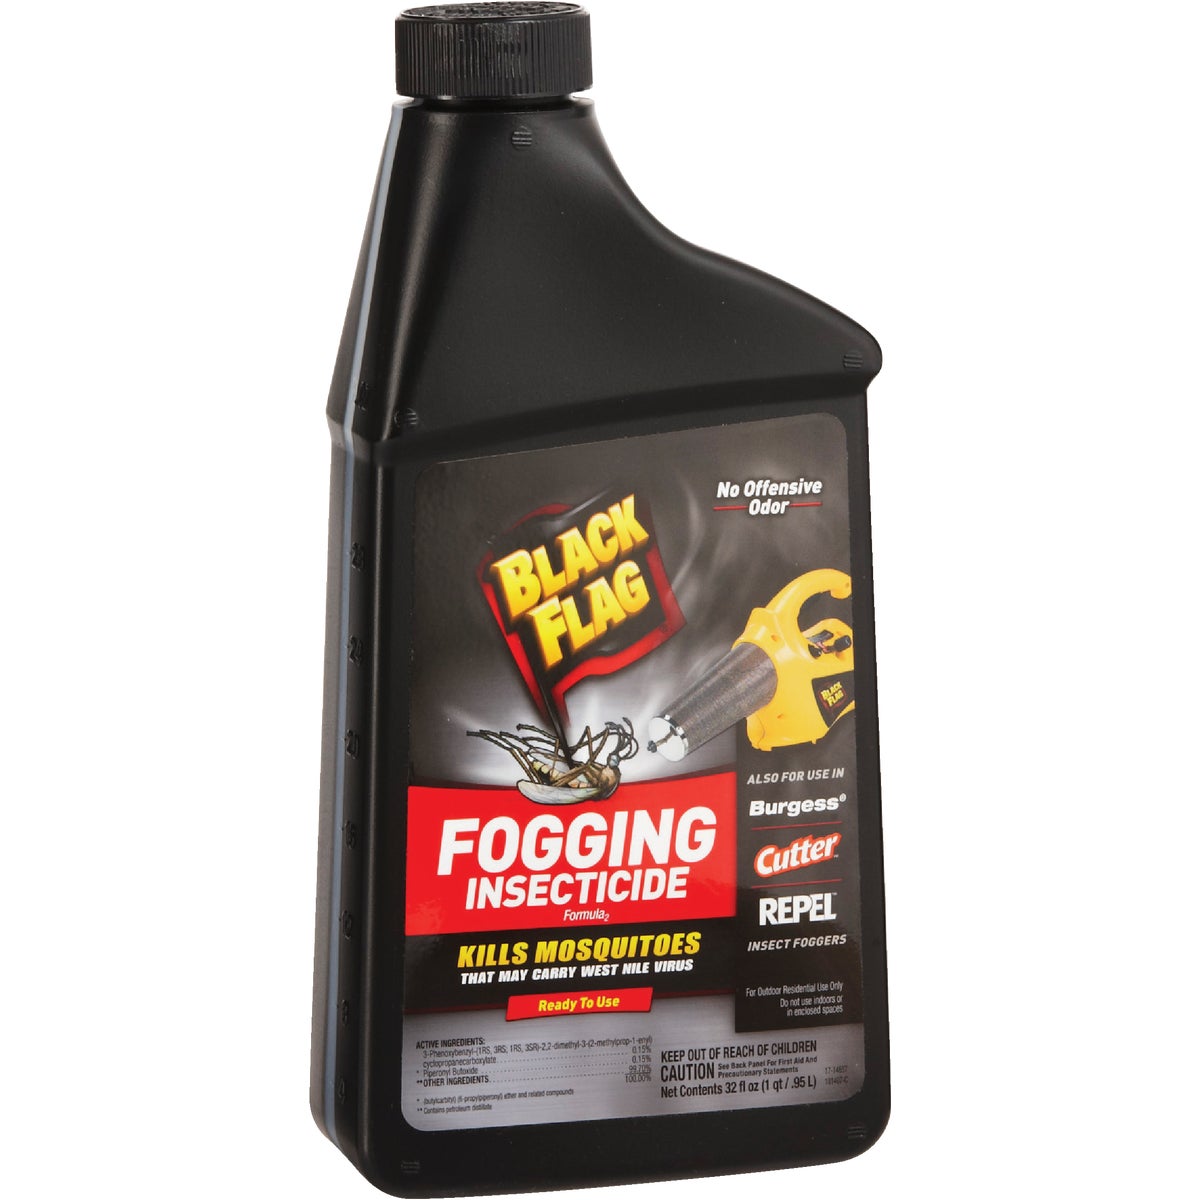 Item 712161, Insecticide for Black Flag and Burgess foggers.